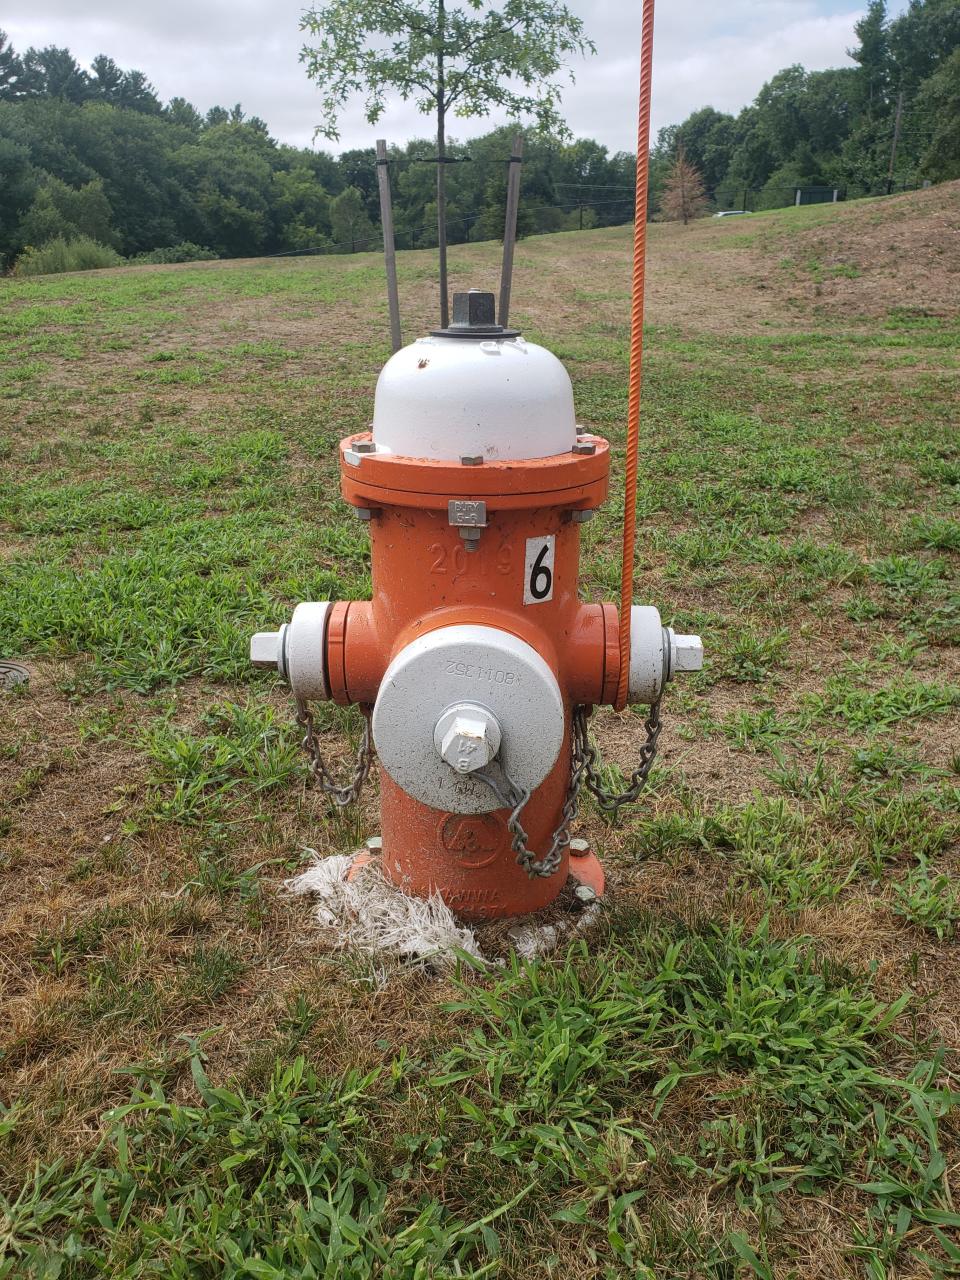 A current, unpainted fire hydrant in the Franklin area.